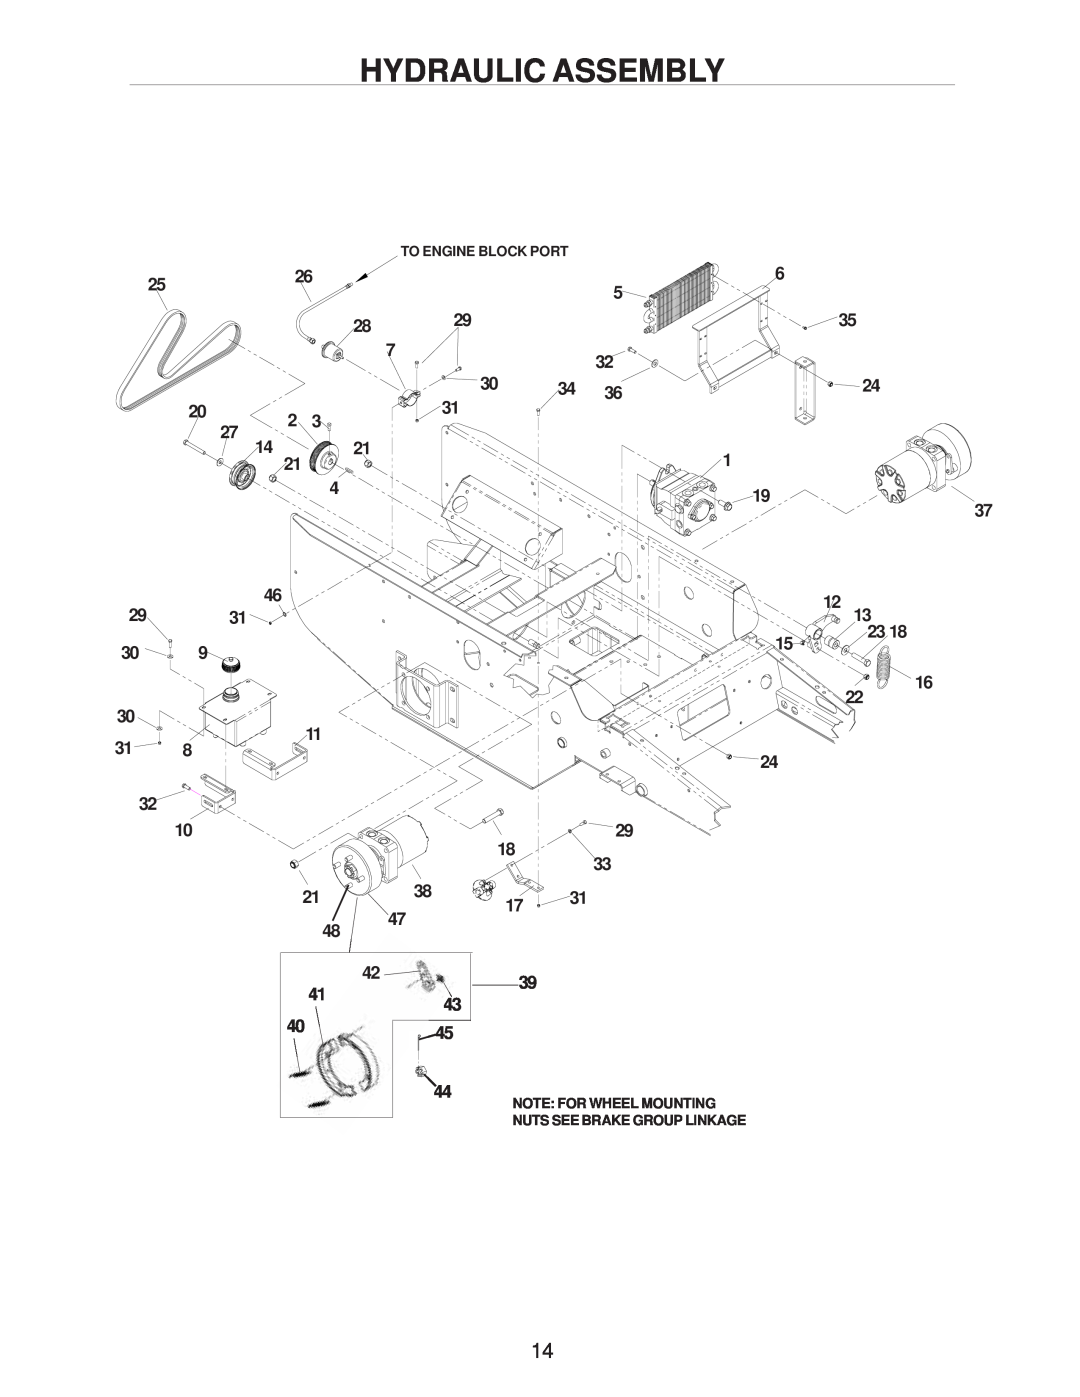 Yazoo/Kees ZHDD61270 manual Hydraulic Assembly, To Engine Block Port, Note For Wheel Mounting, Nuts See Brake Group Linkage 